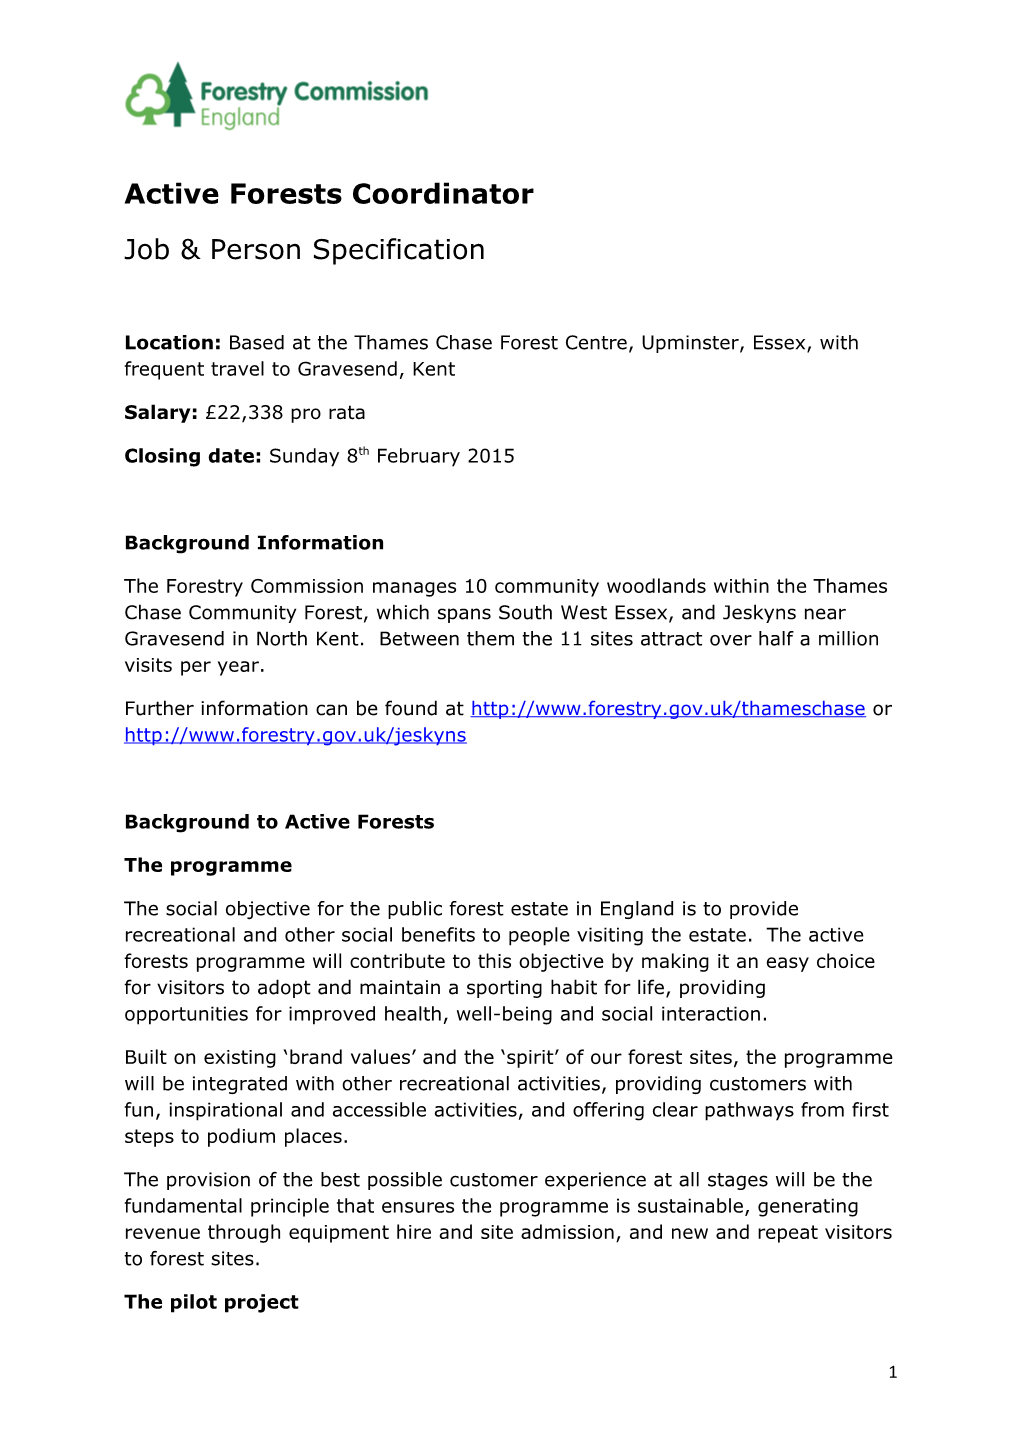 Active Forests Coordinator Job & Person Specification Template